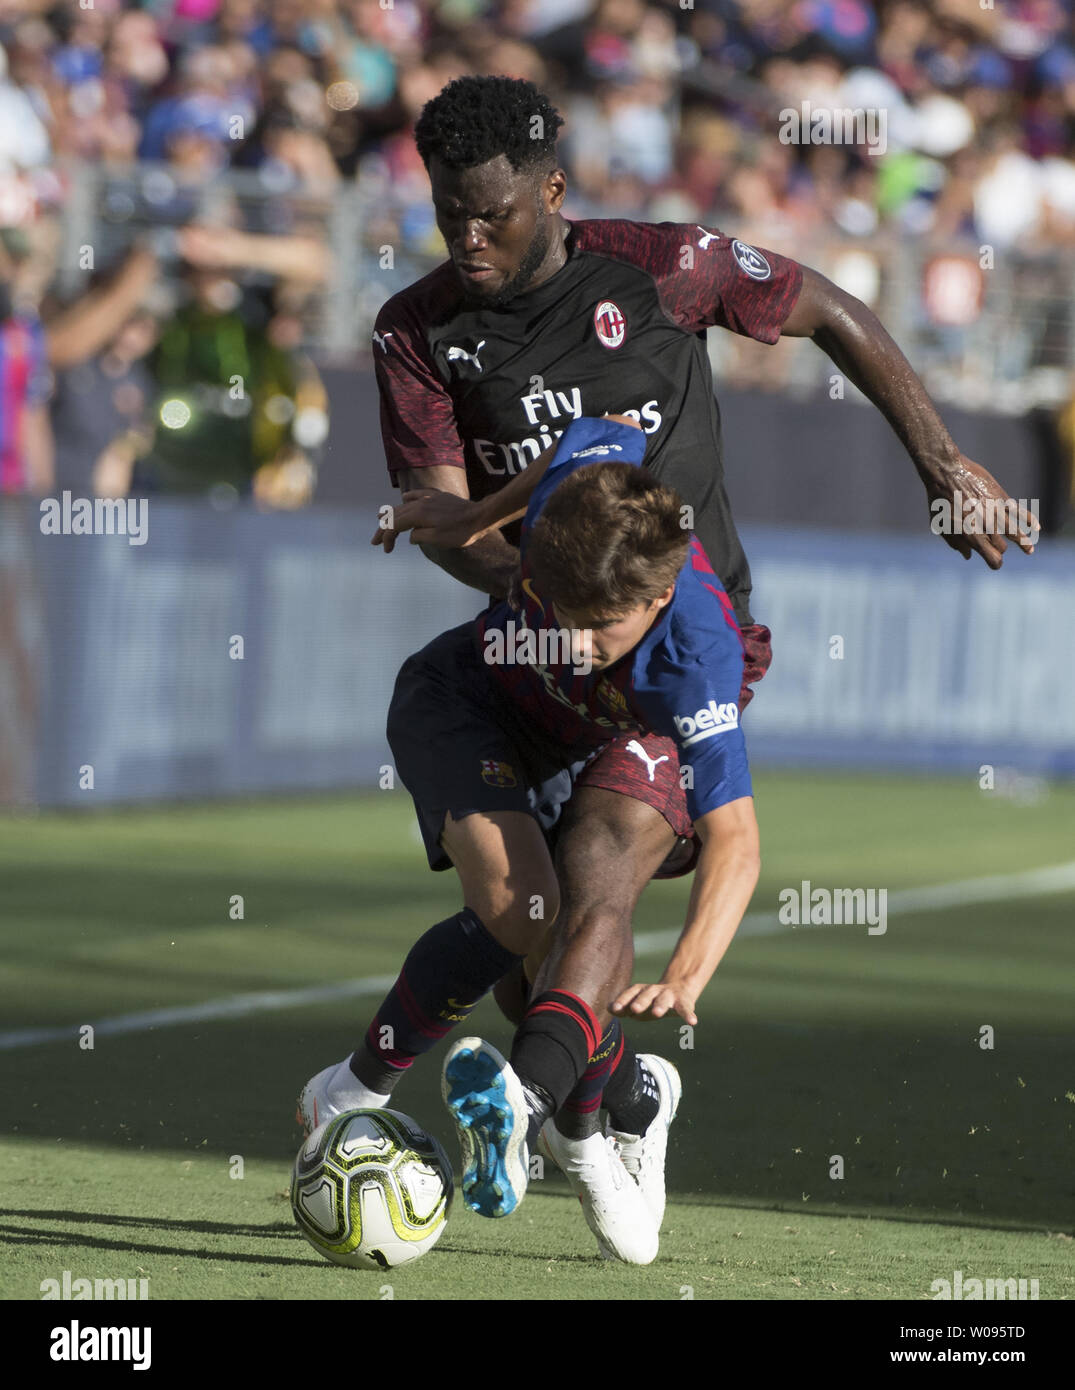 A.C. Milan's Franck Kessie (79) knocks down F.C. Barcelona's Ricky Puig in  the first half of International Champions Cup soccer at Levi's Stadium in  Santa Clara, California on August 4, 2018. Milan